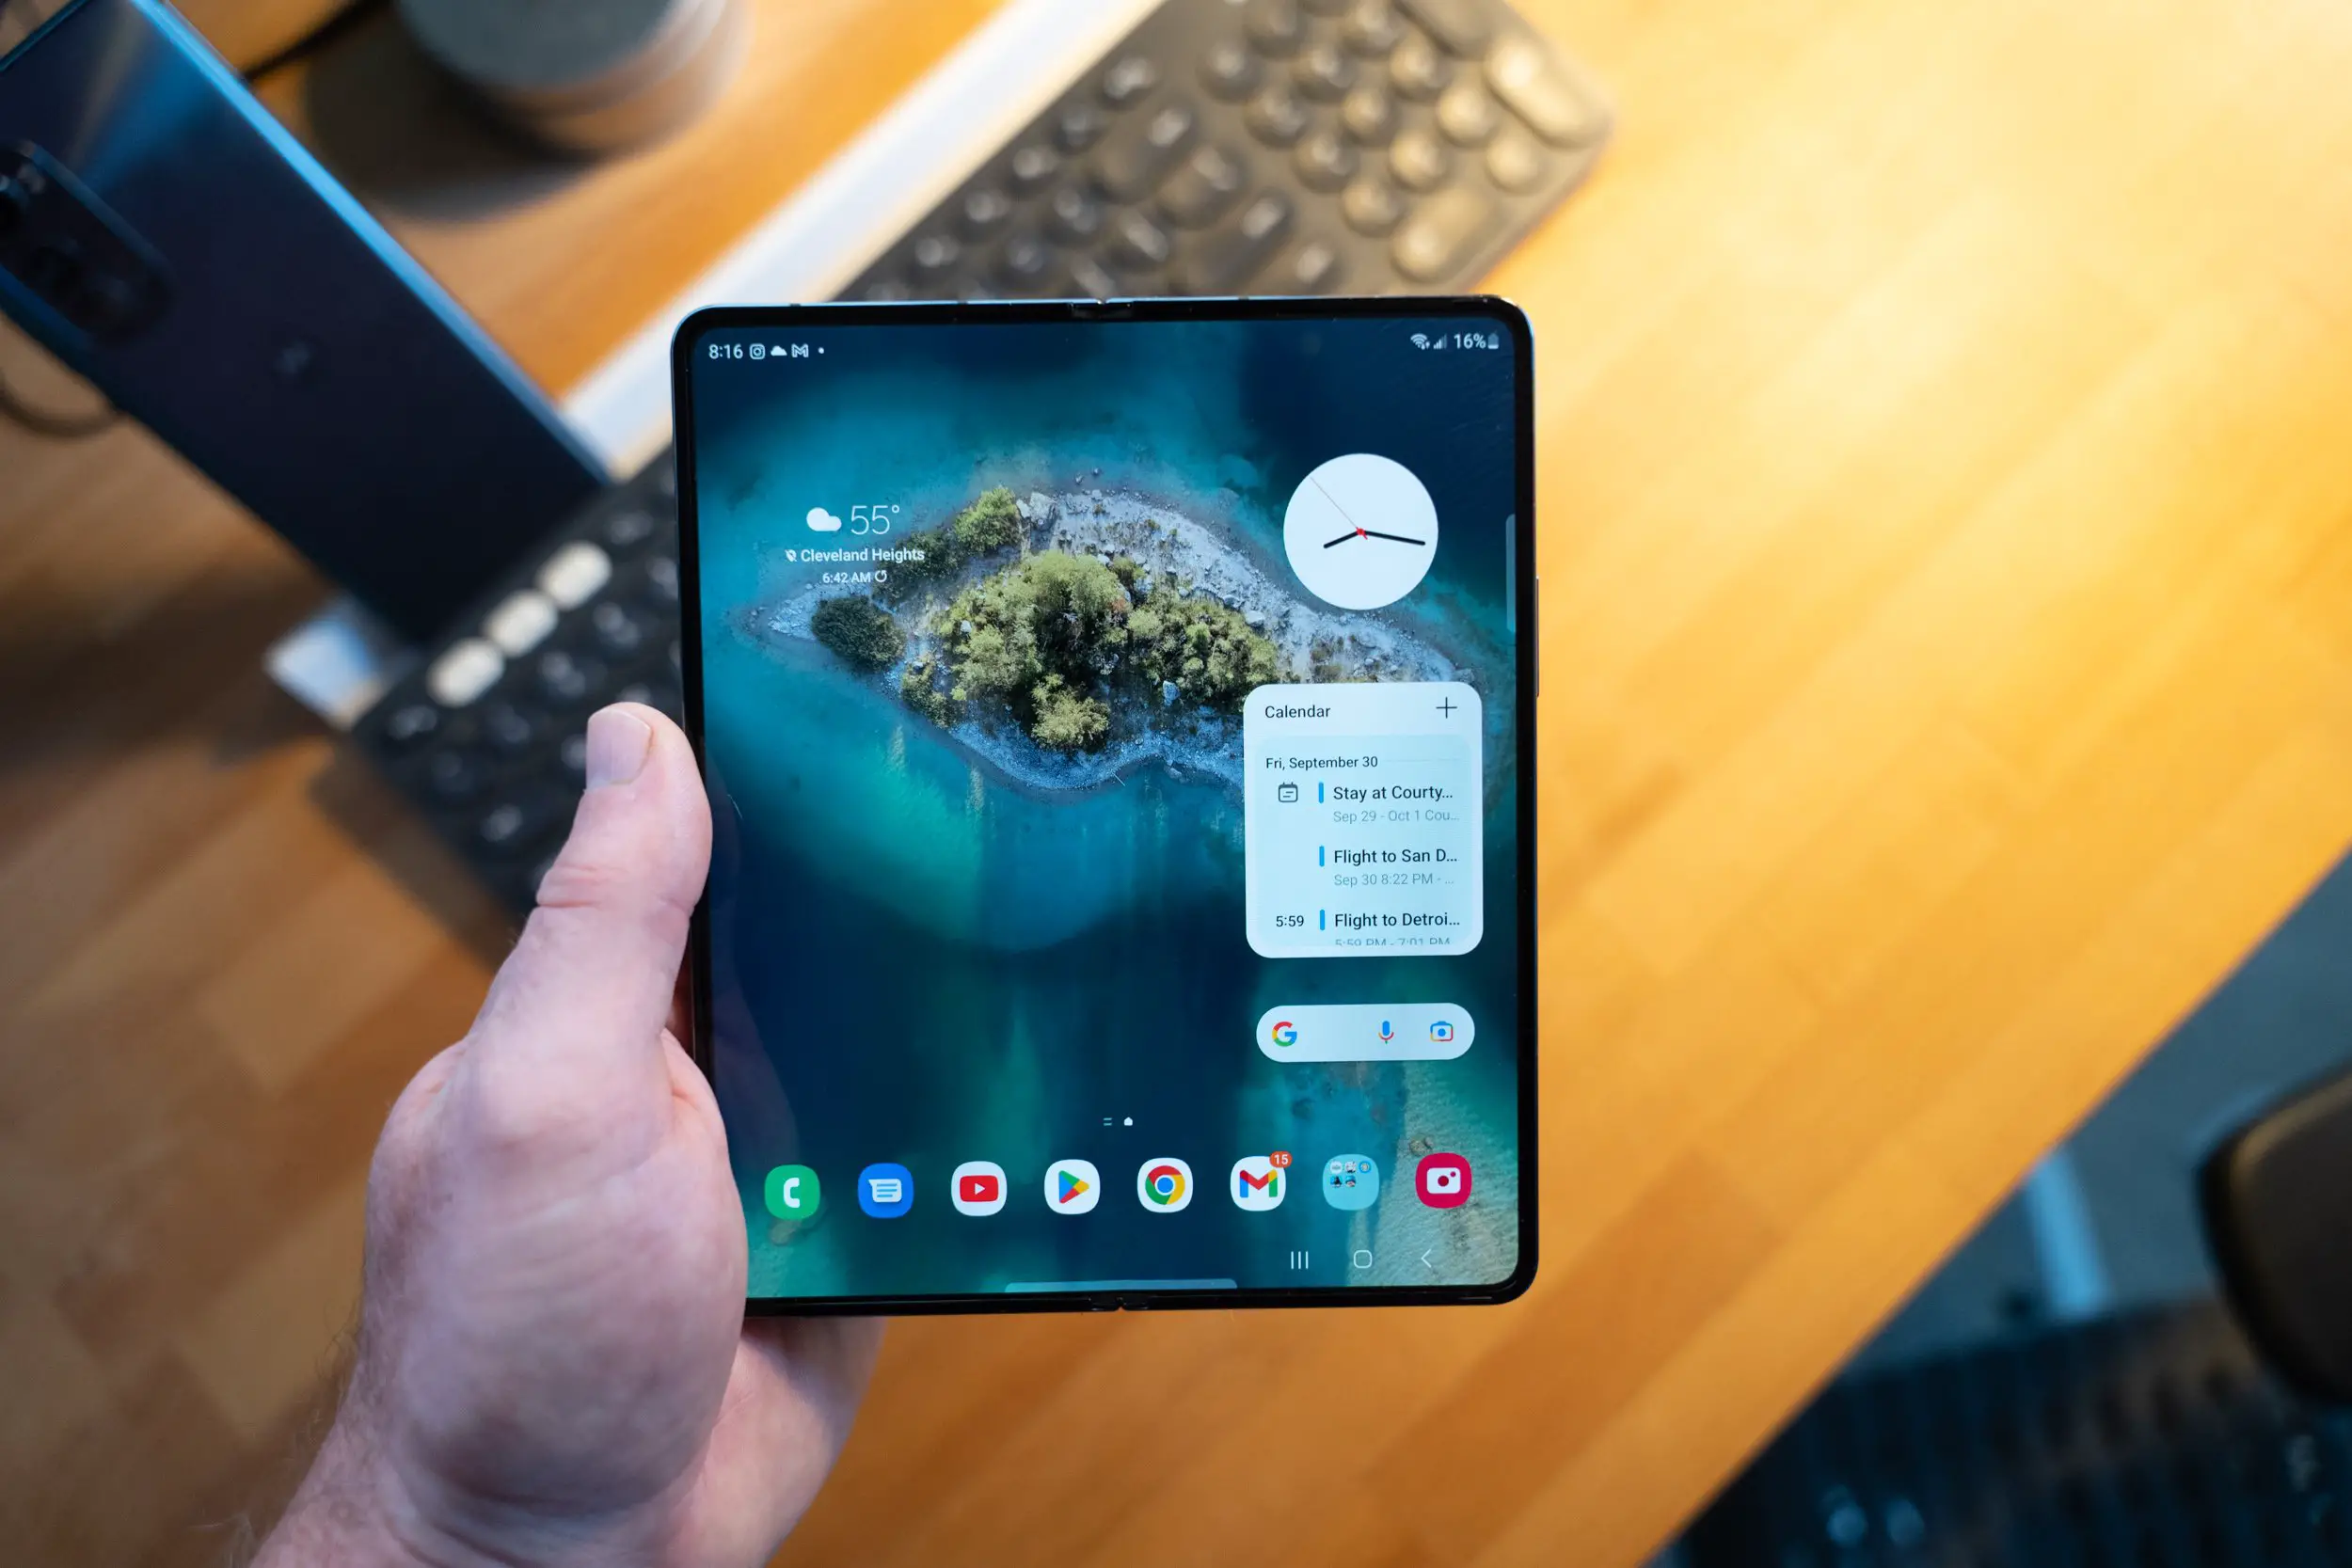 Samsung Galaxy Z Fold 4 Review: Small Upgrades Add Up To More Than